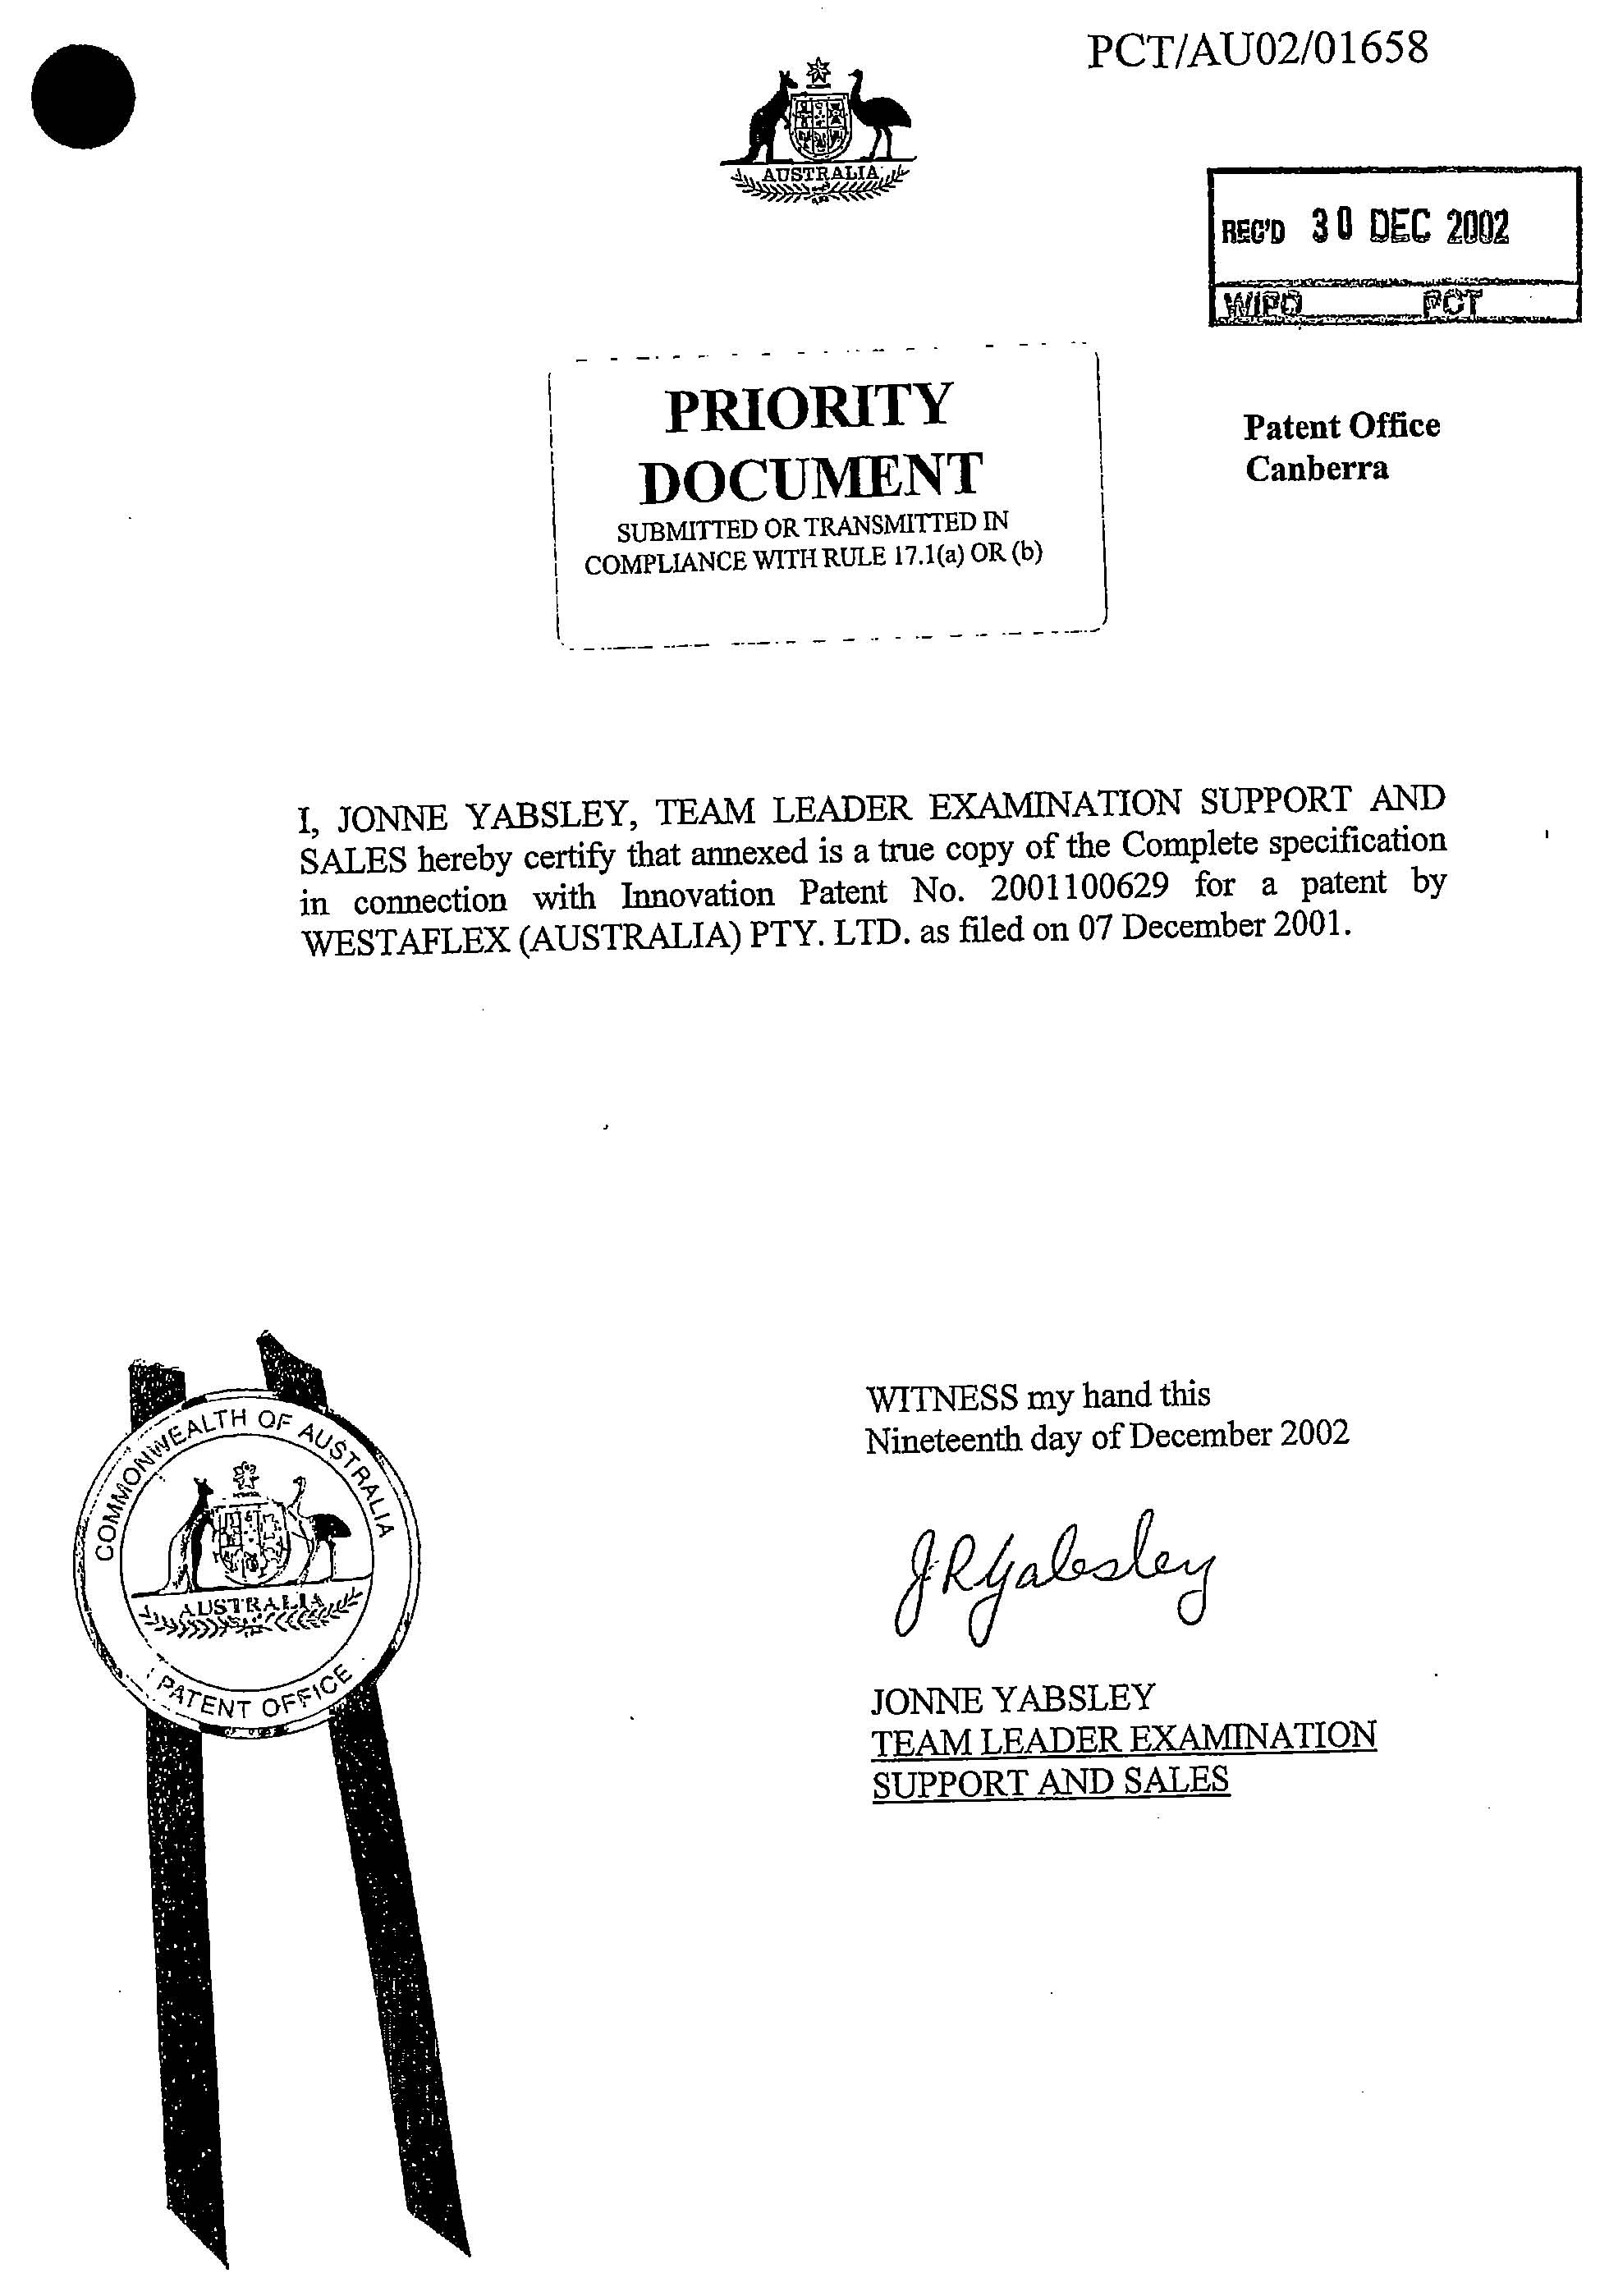 Copy of first page of PCT/AU02/01658 Priority Document Submitted or Transmitted in Compliance with Rule 17.1(a) or (b). Patent Office Canberra.